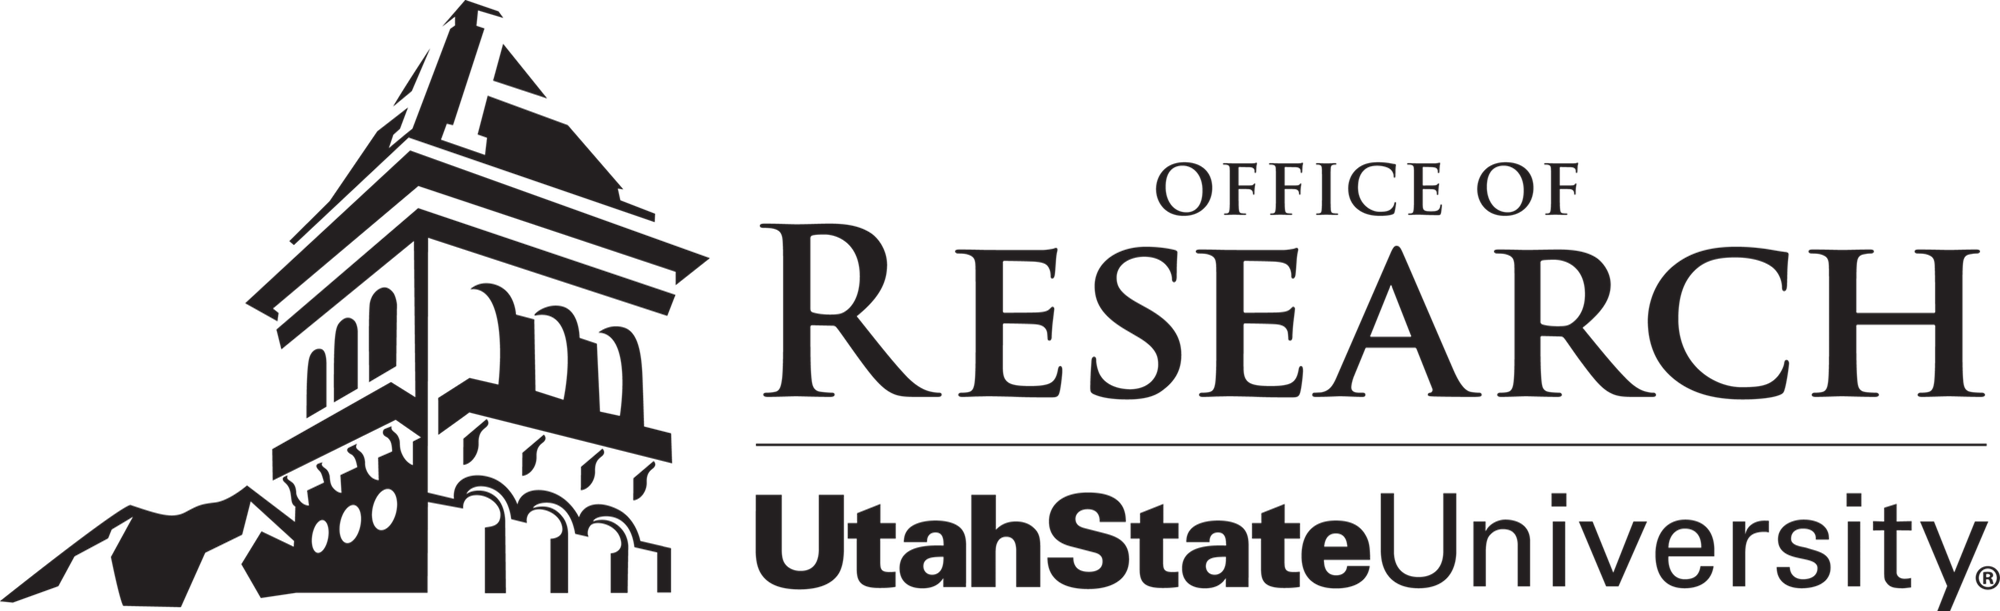 Office of research, usu 